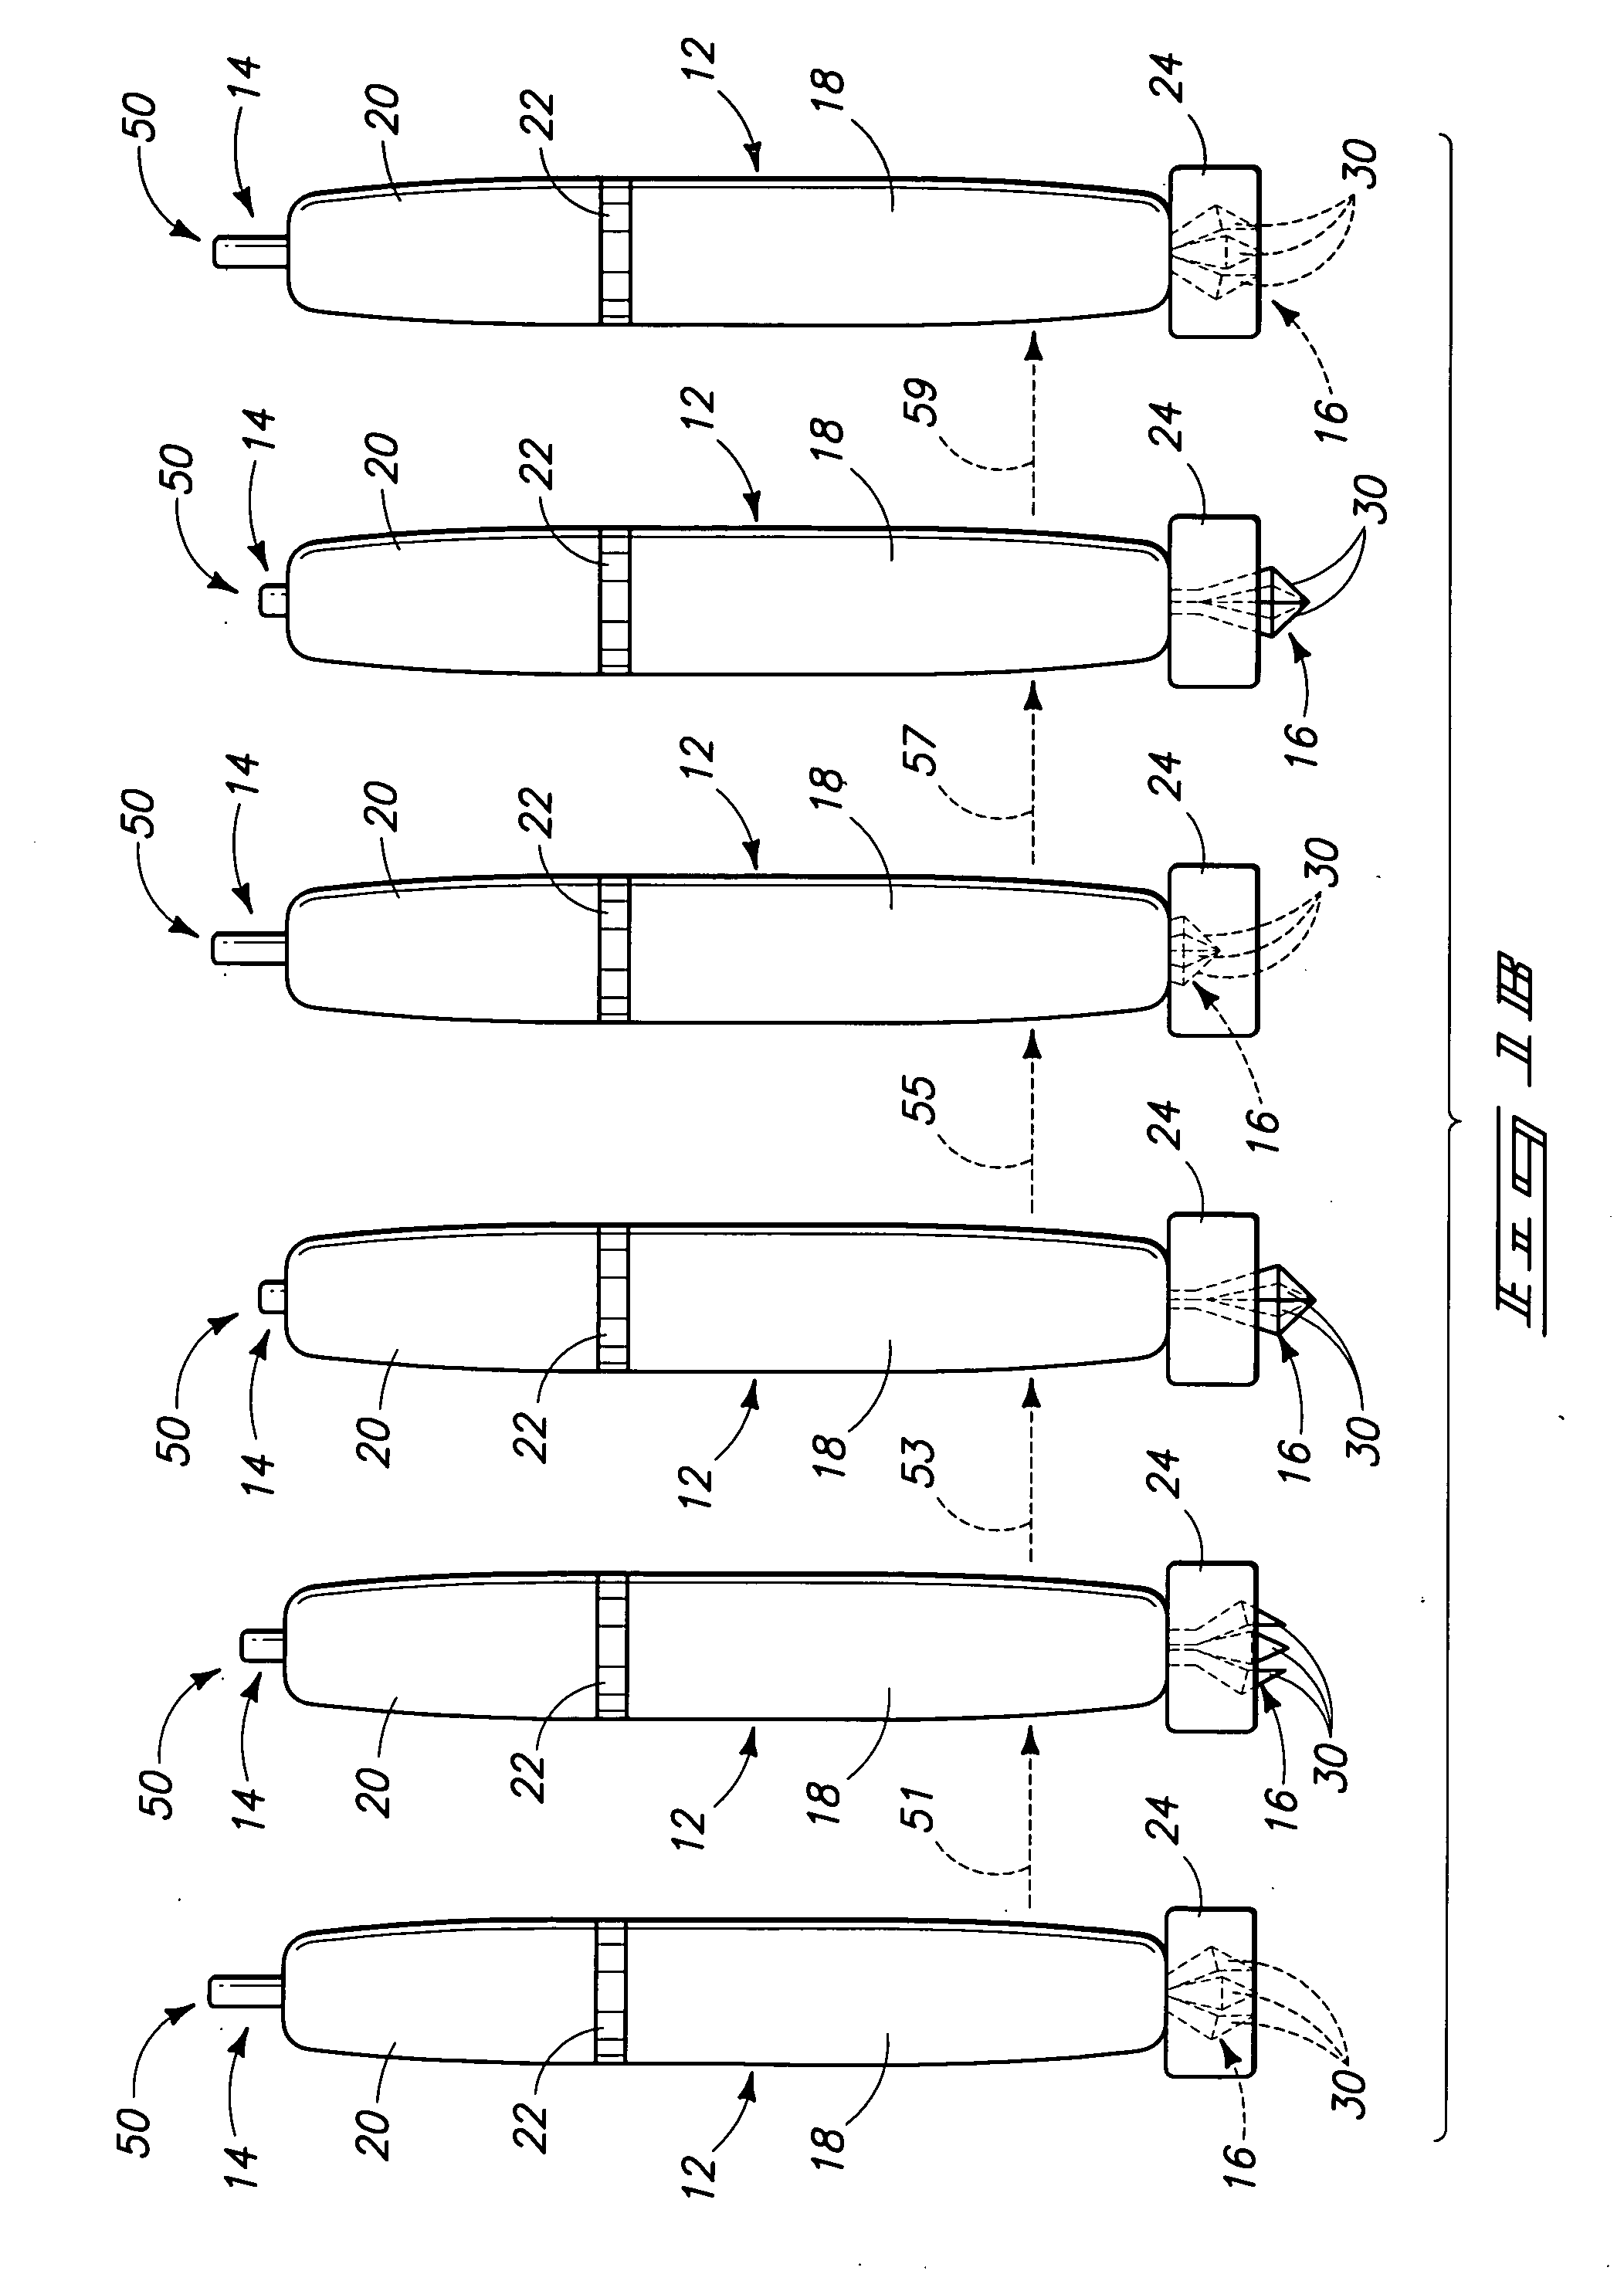 Skin Biopsy Devices, Kits Containing Skin Biopsy Device, and Methods of Obtaining a Skin Biopsy